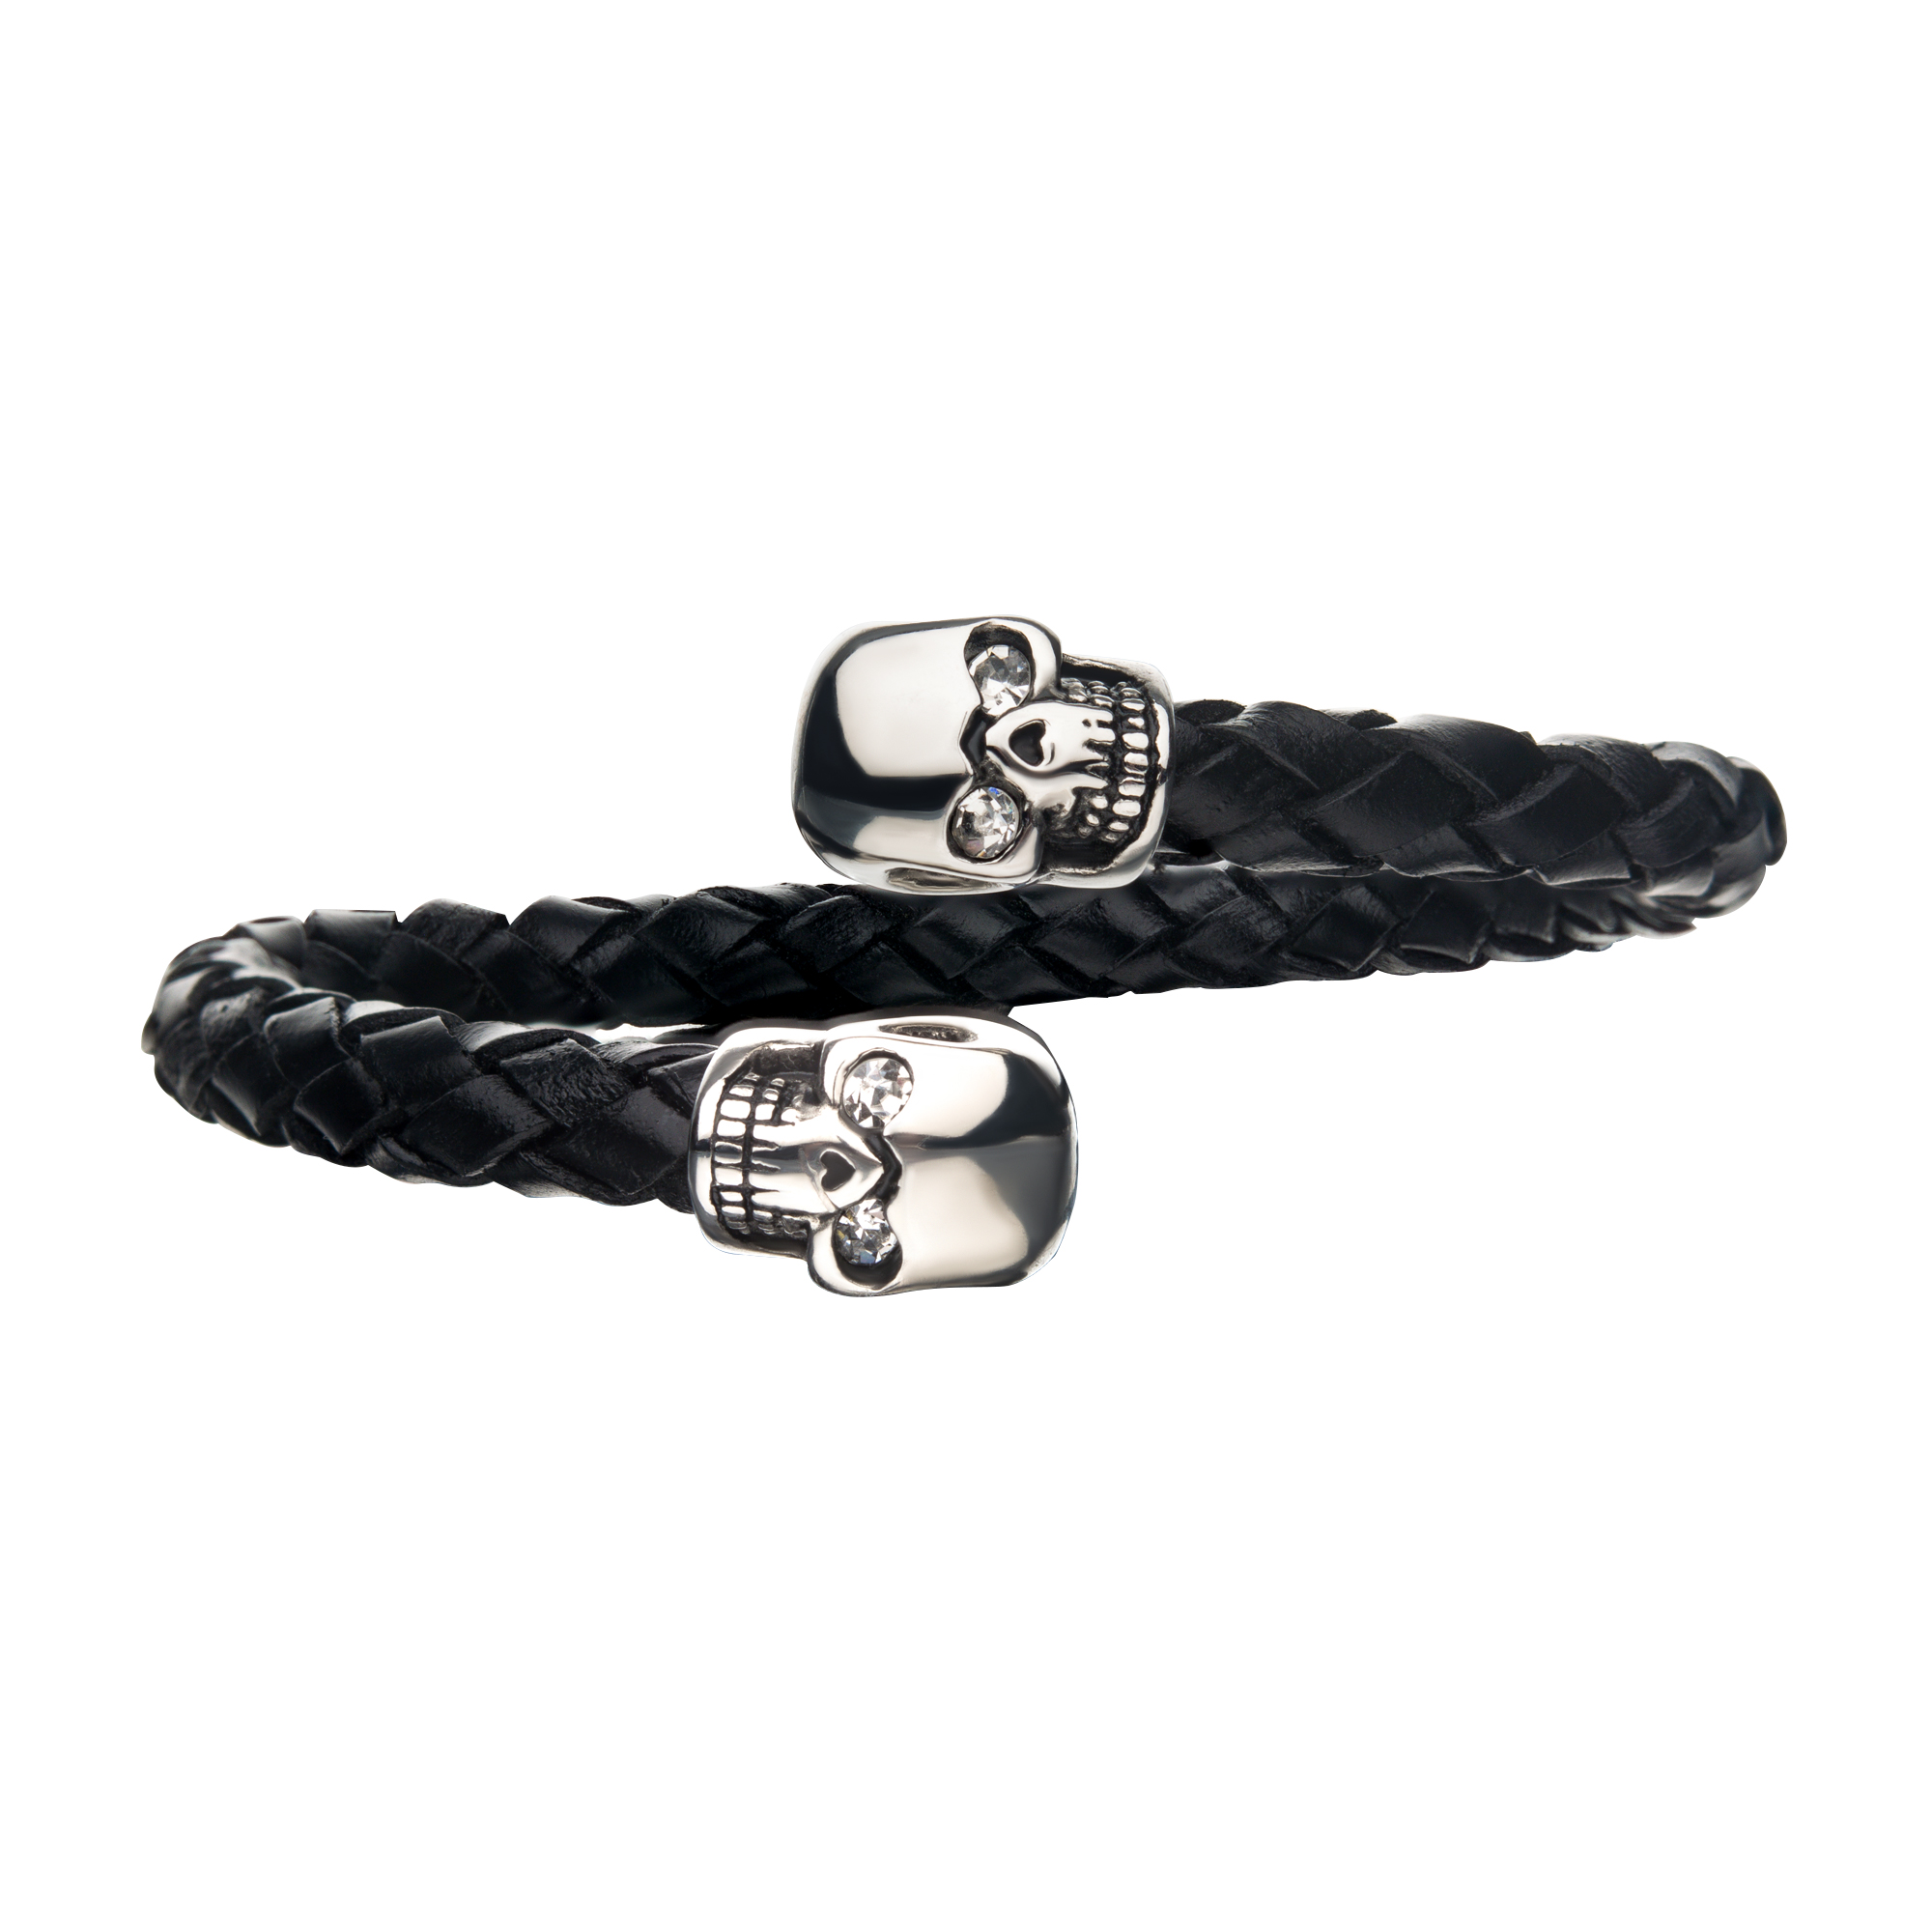 Skull Ends Cuff Leather Bracelet Enchanted Jewelry Plainfield, CT